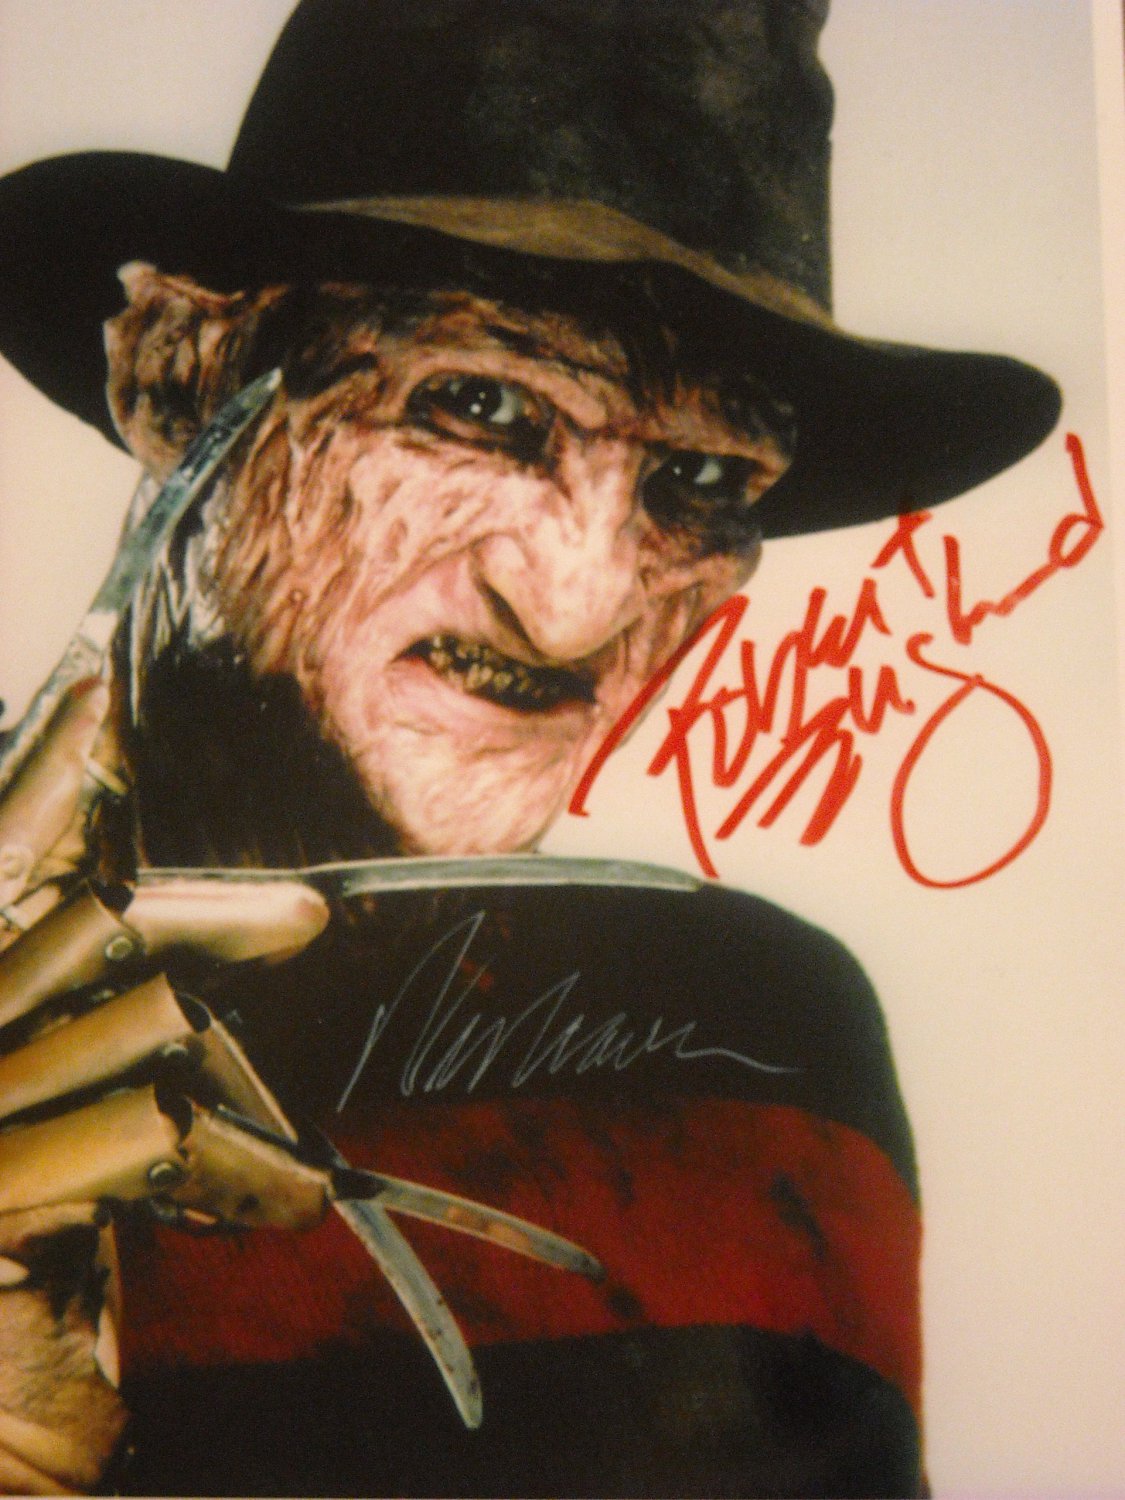 Robert Englund & Wes Craven Signed & Mounted 8 x 10" Autographed Photo (Reprint:2300)